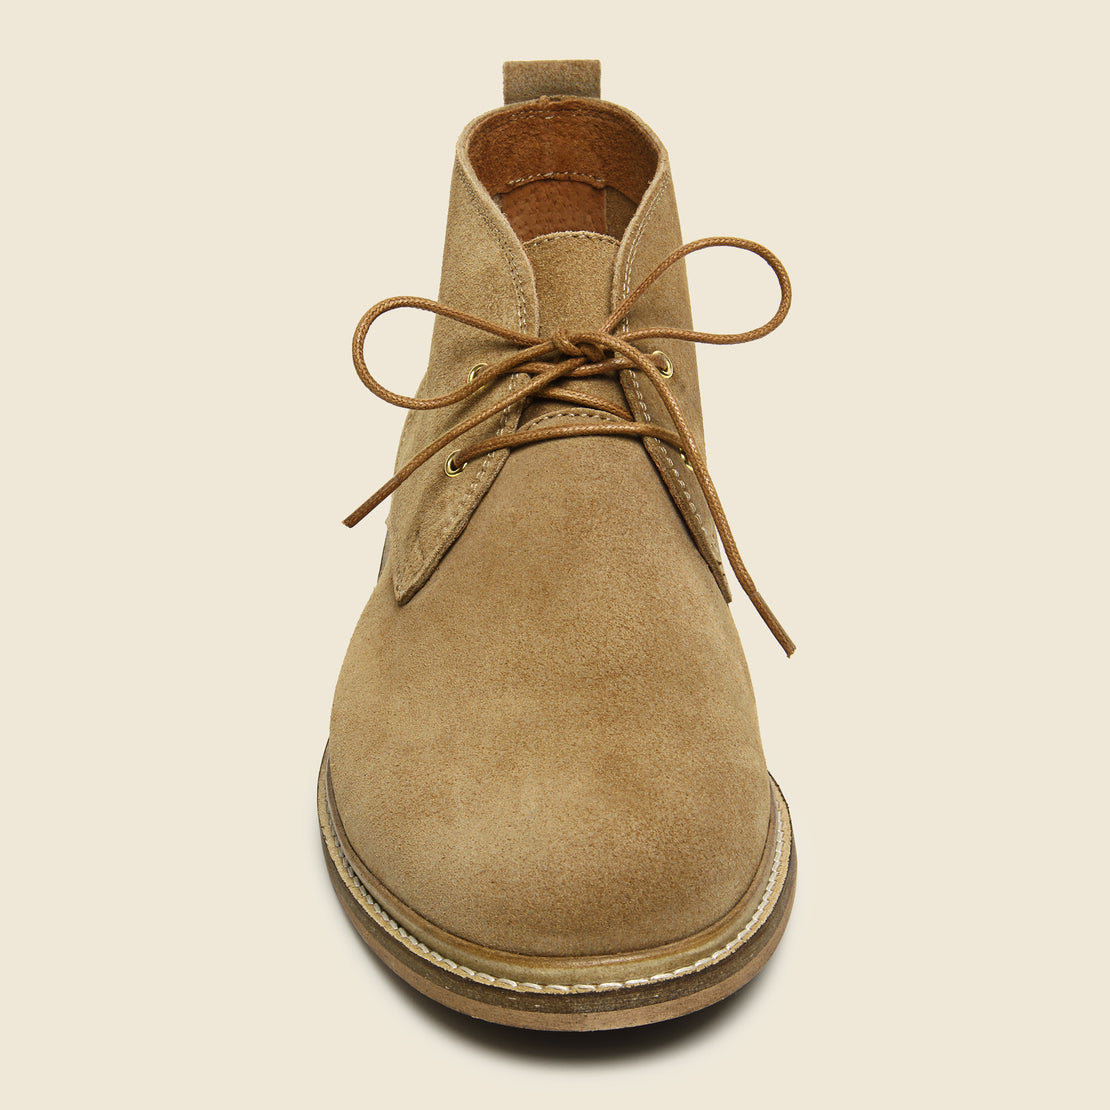 Caleb Suede Chukka - Camel - Shoe the Bear - STAG Provisions - Shoes - Boots / Chukkas